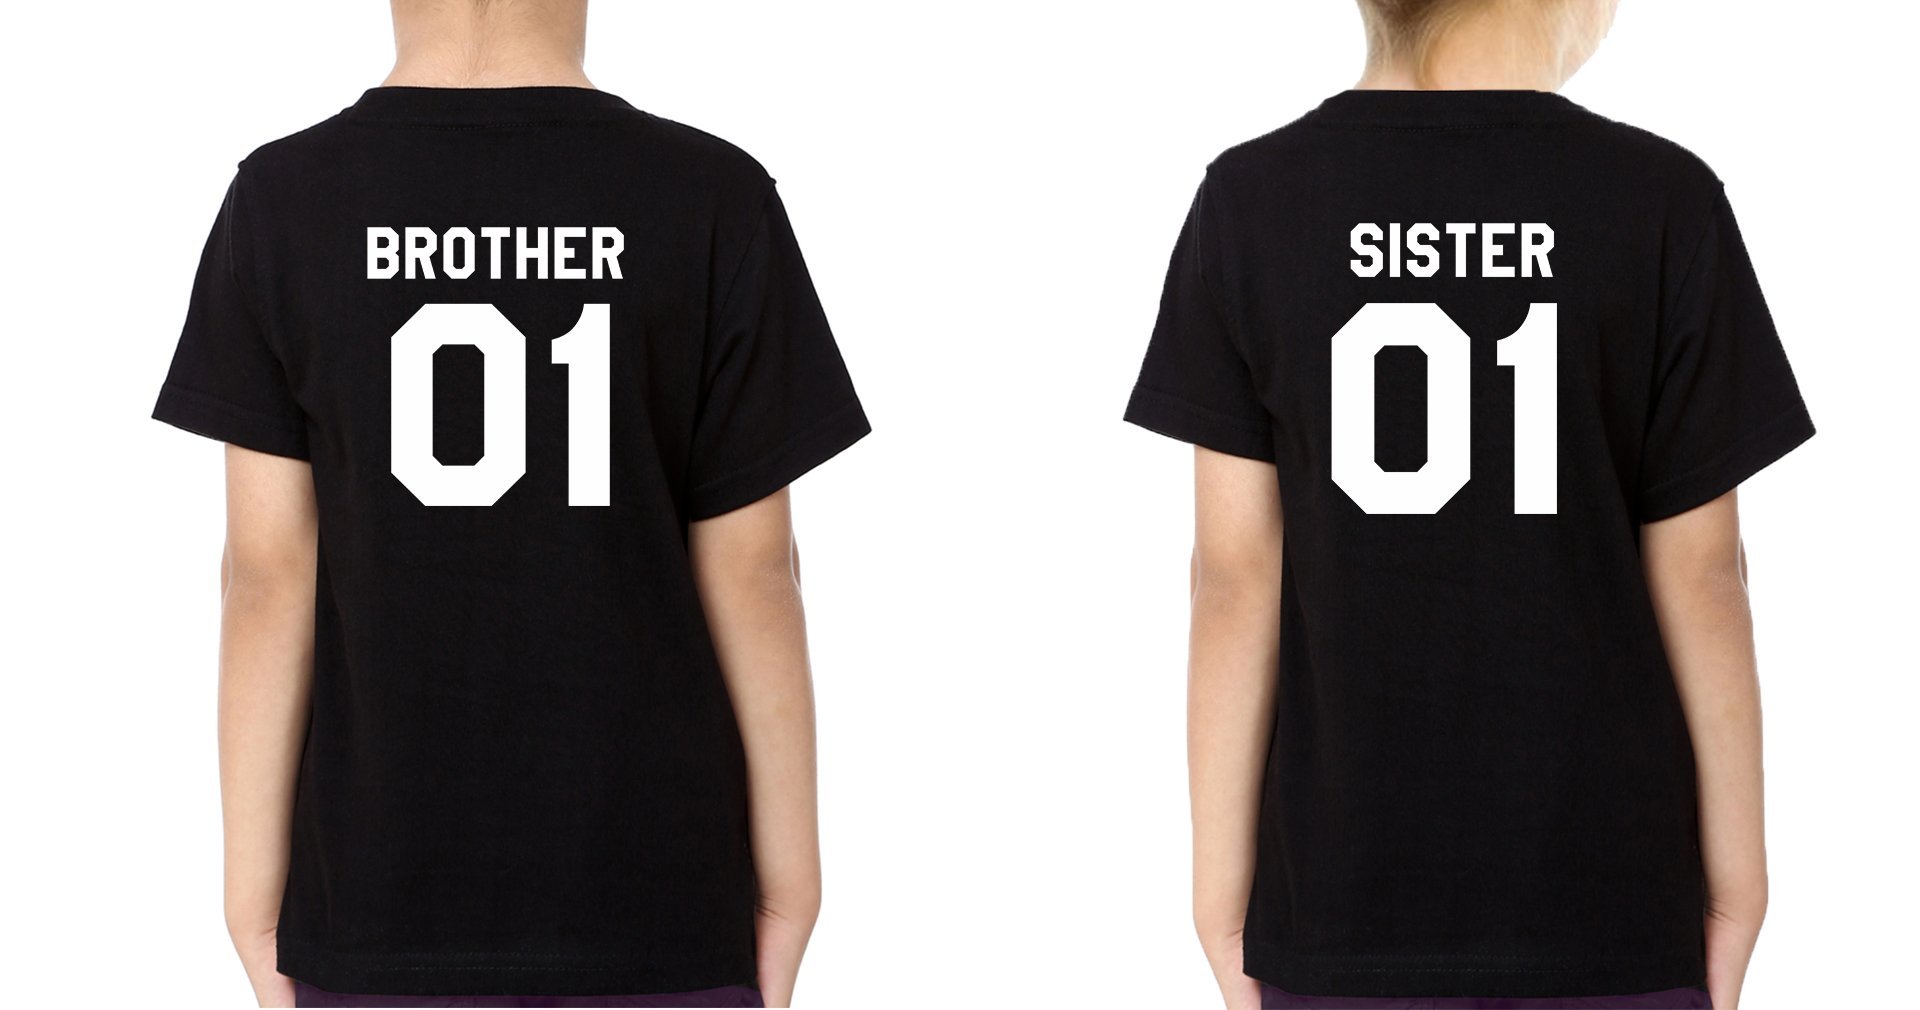 Brother01 Sister02 Brother-Sister Kid Half Sleeves T-Shirts -FunkyTradition - FunkyTradition